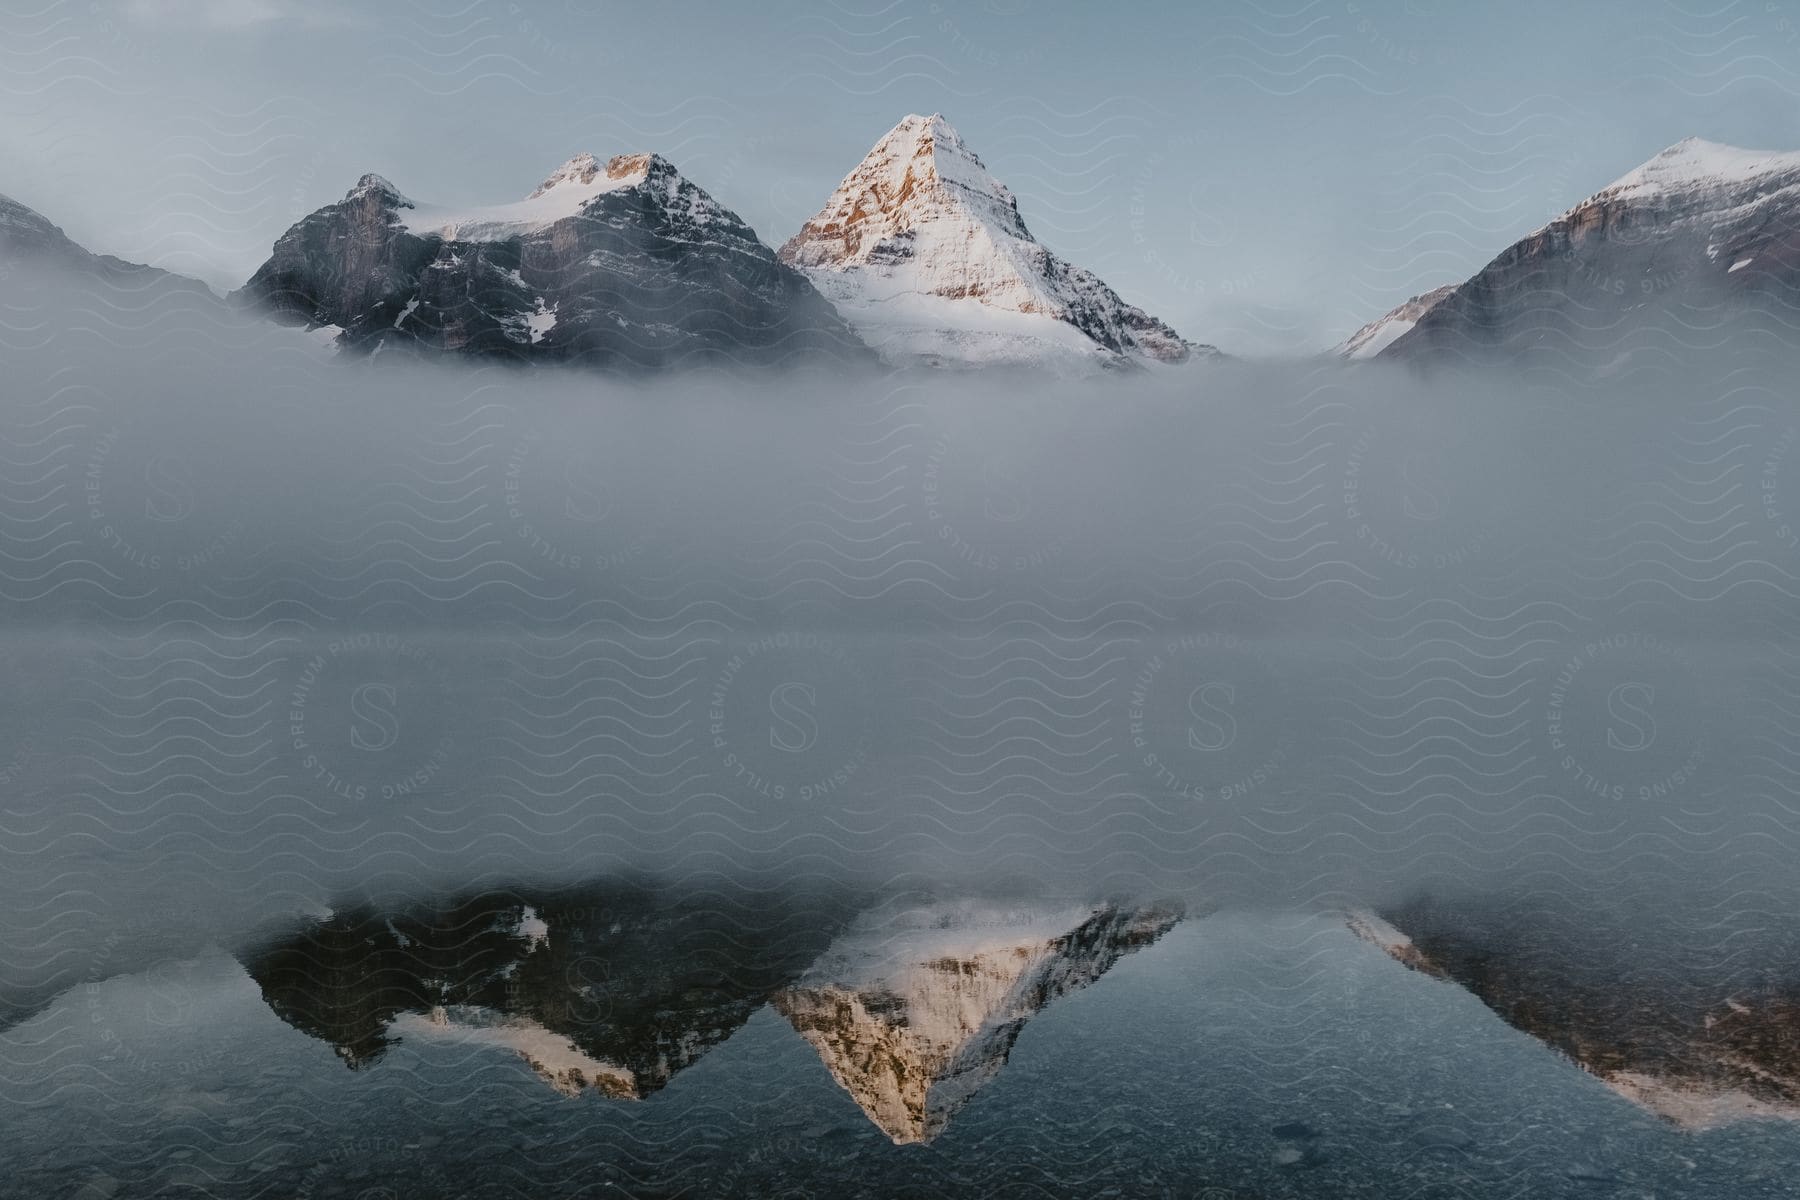 Snow-capped mountain peaks emerging from a dense layer of mist, perfectly reflected in the still waters of a serene lake.